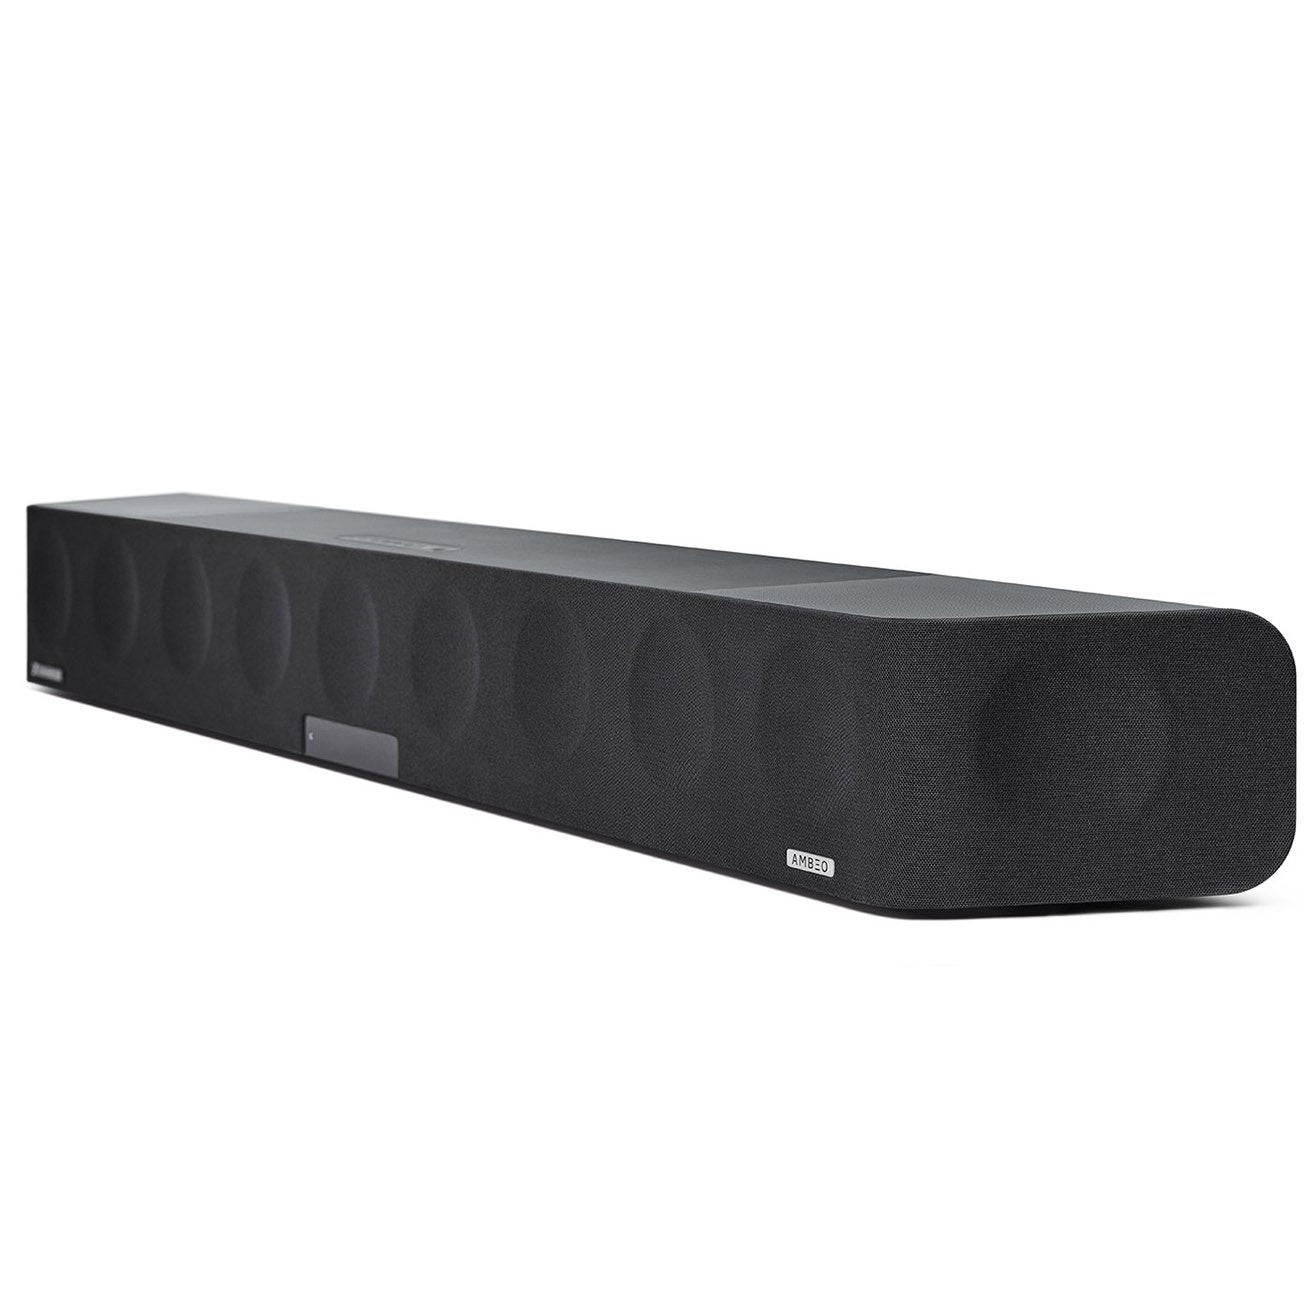 Sennheiser AMBEO Max Soundbar - 5.1.4 Channel with Dolby Atmos and DTS:X - image 1 of 9